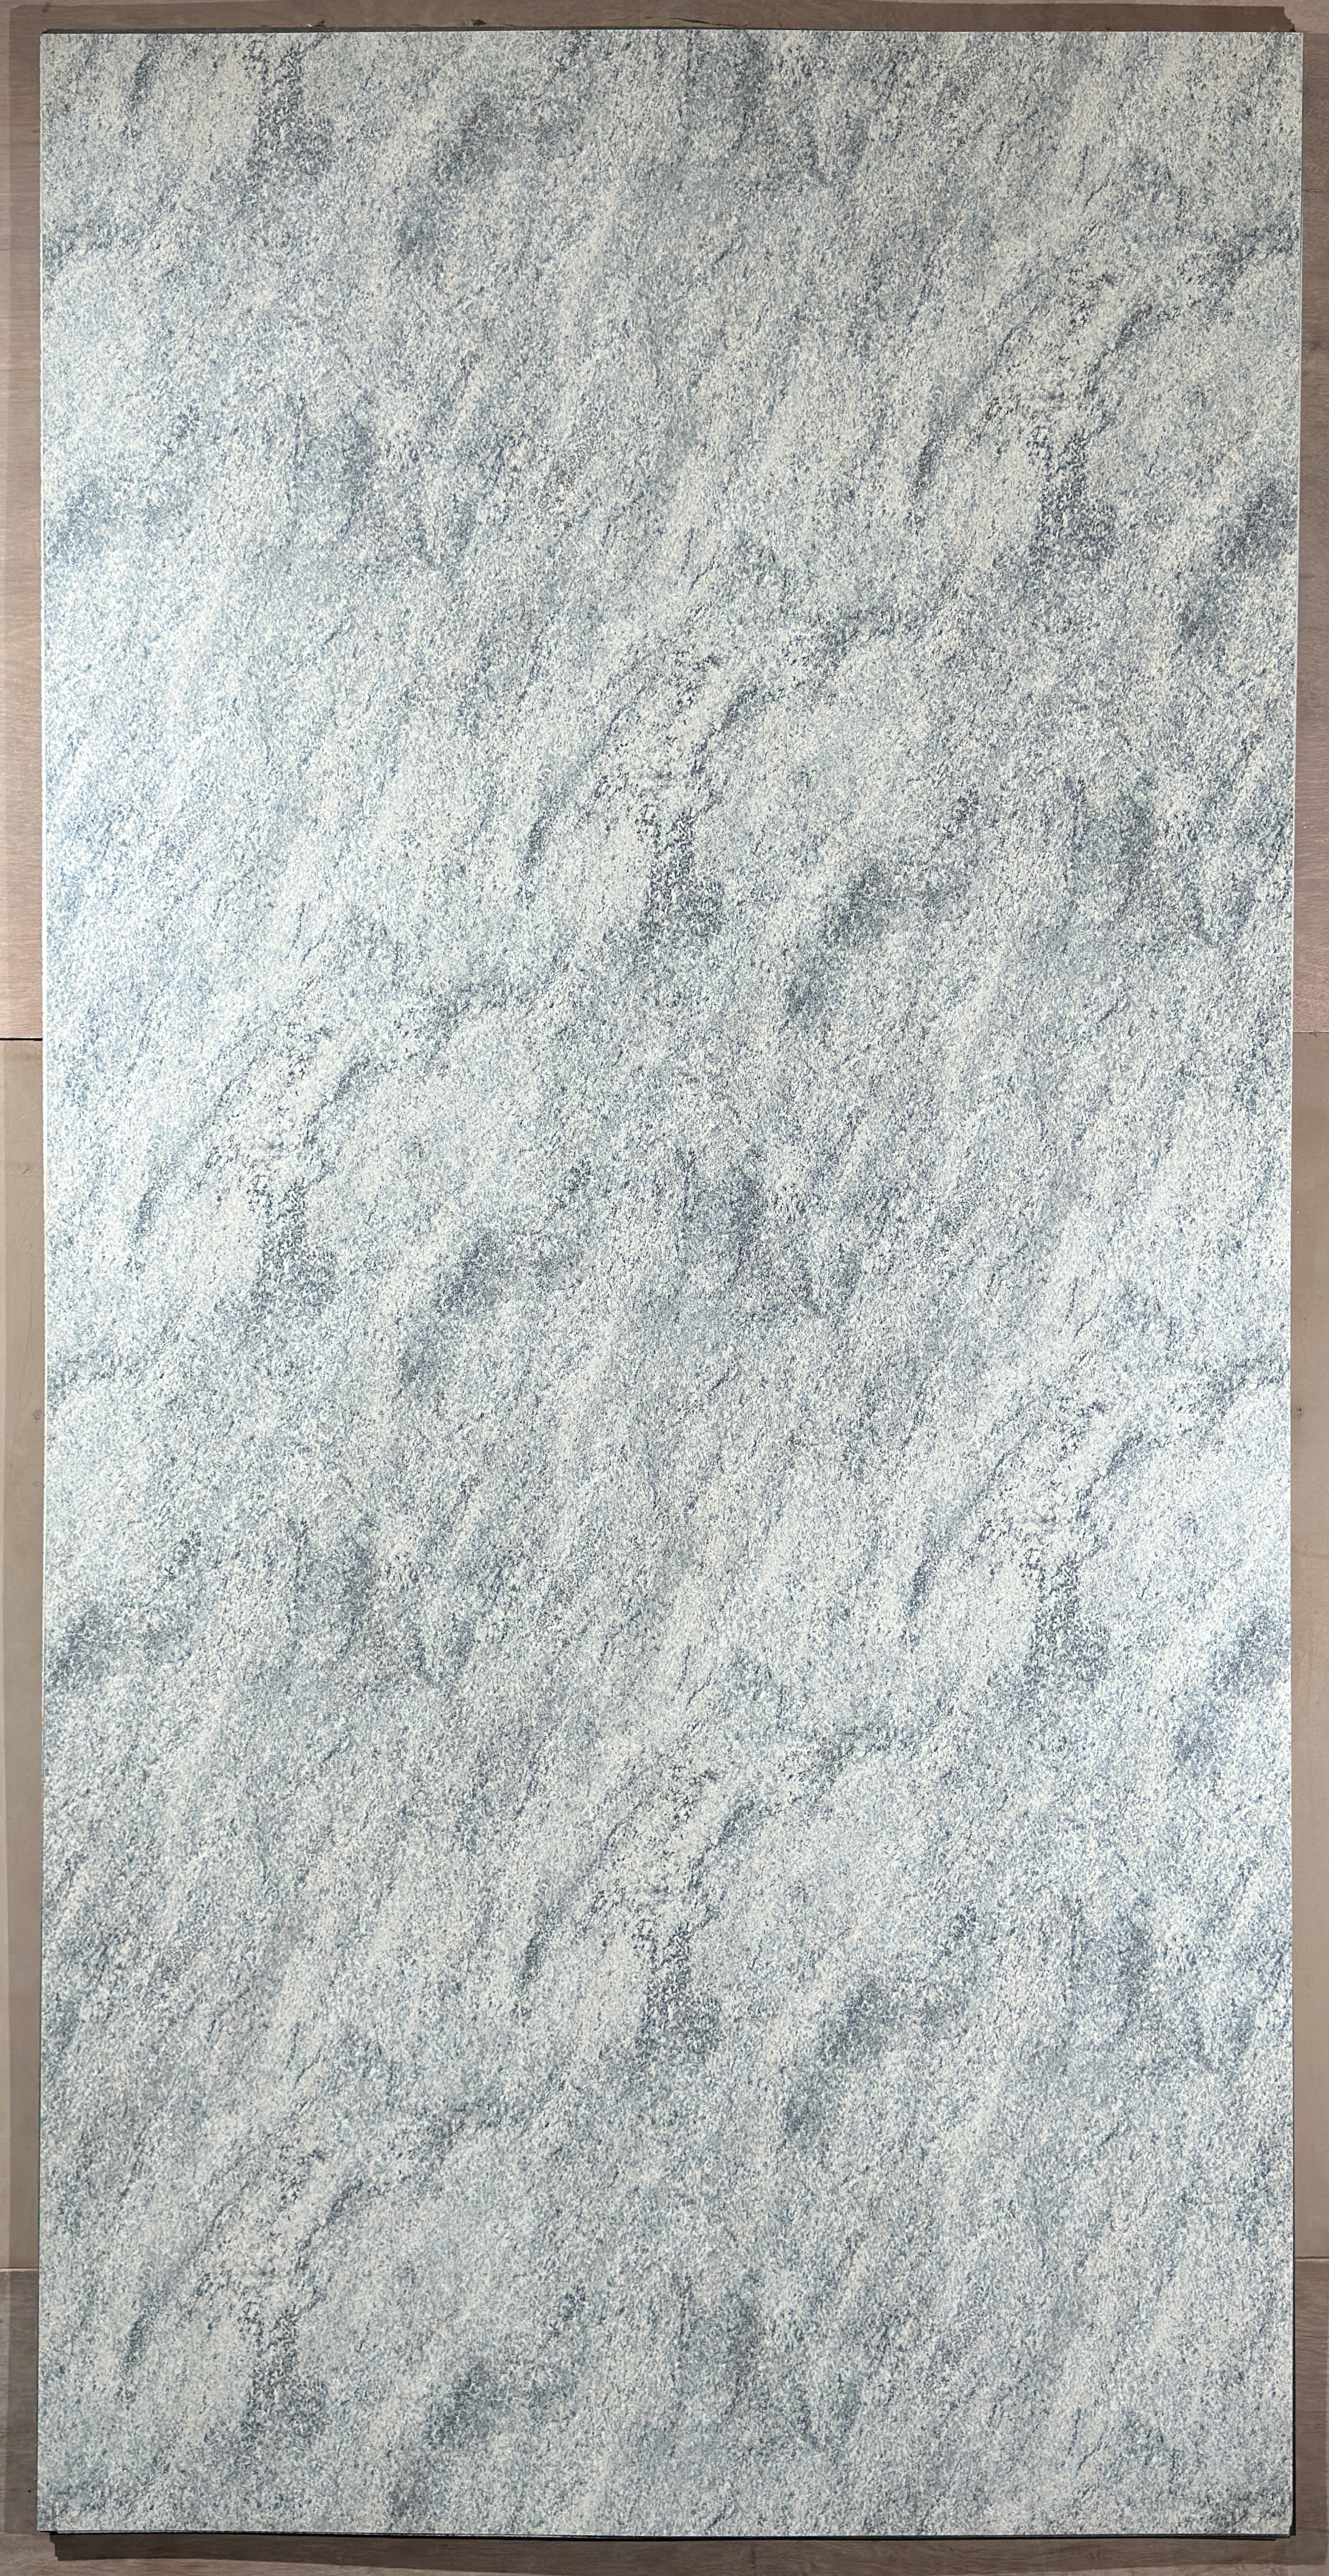 87181 MS Grey Decorative Laminate of 1 mm with a Texture finish available for sale at Material Depot in Bangalore